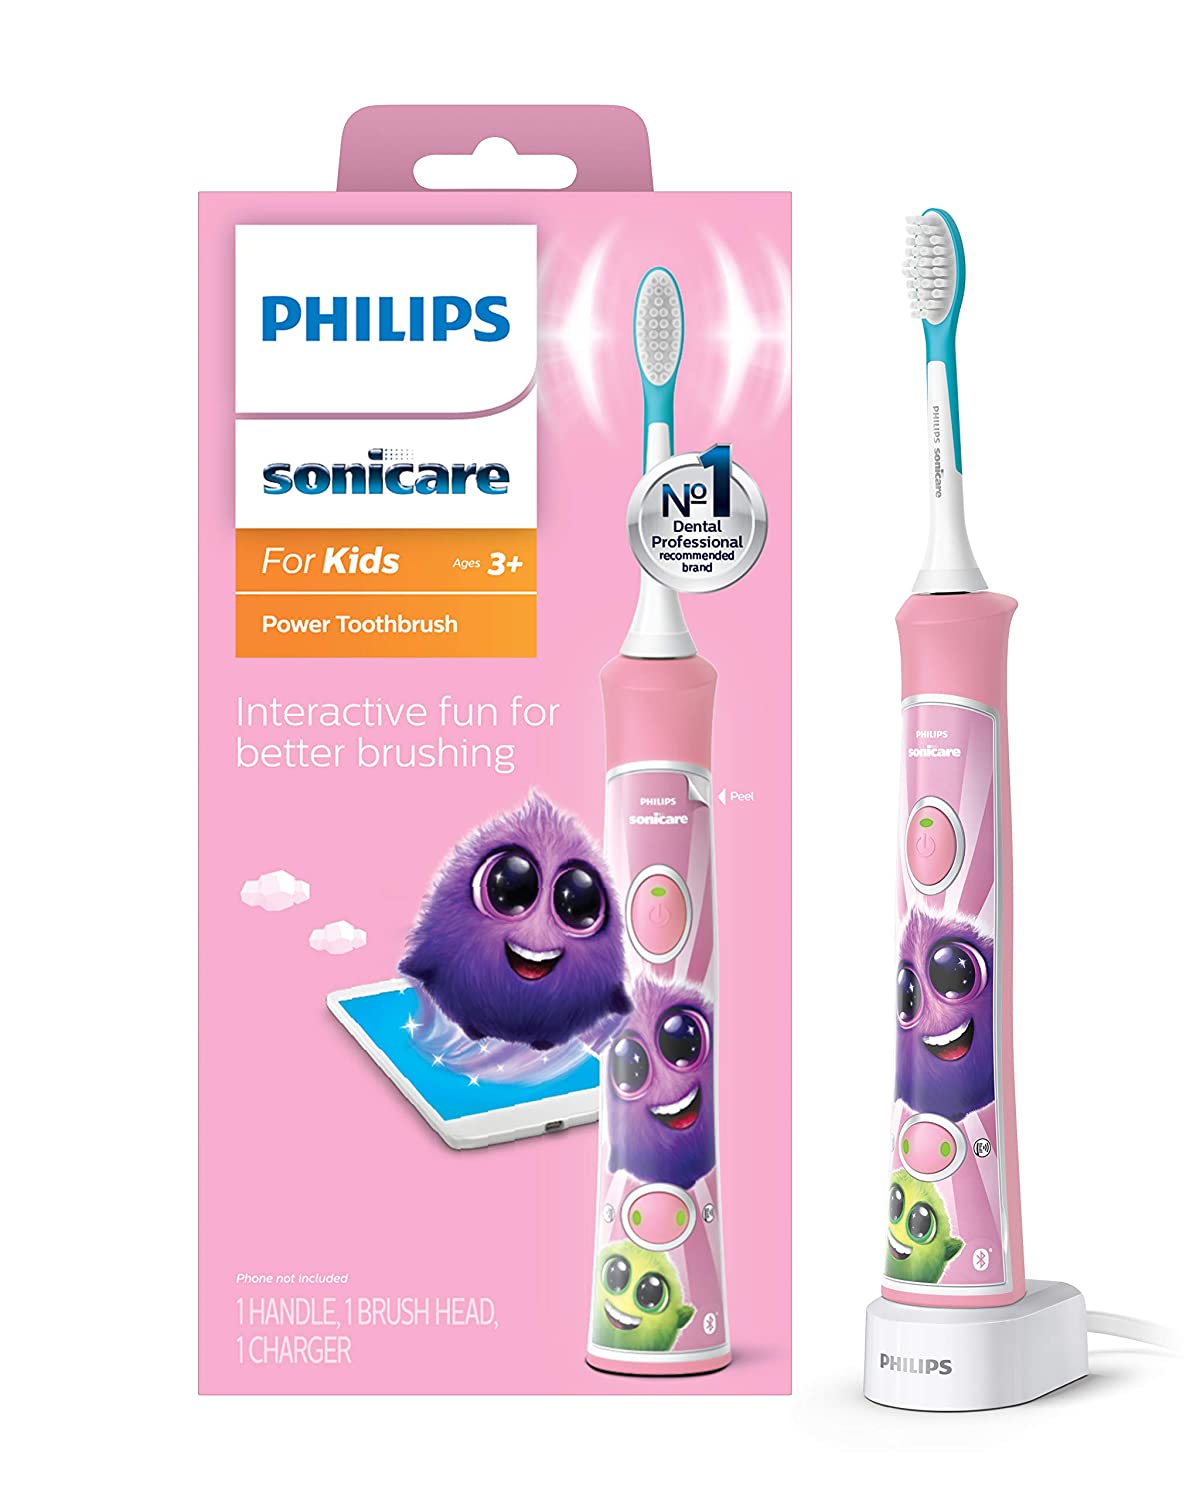 Philips Sonicare for Kids Bluetooth Connected Rechargeable Electric Toothbrush - Pink HX6351/41 - Pro-Distributing